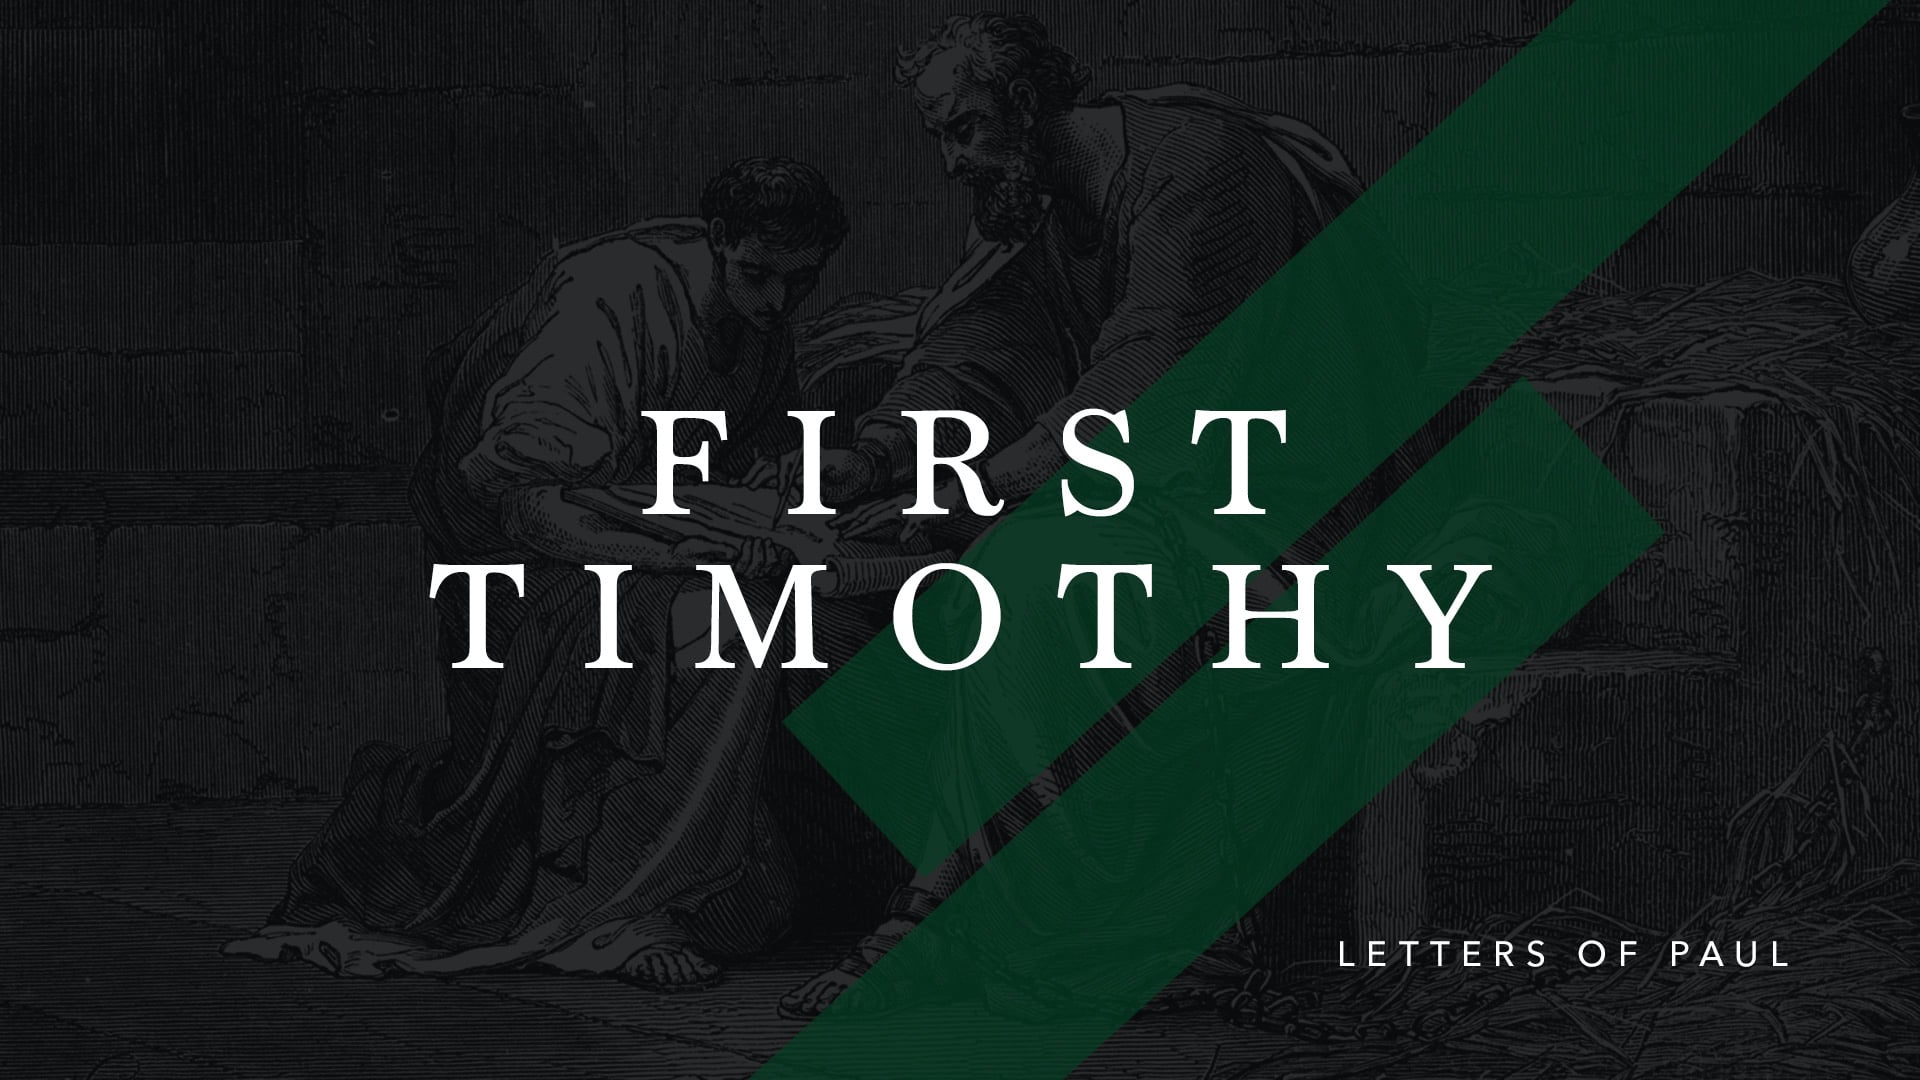 First Timothy: Women in Ministry (Part 2)